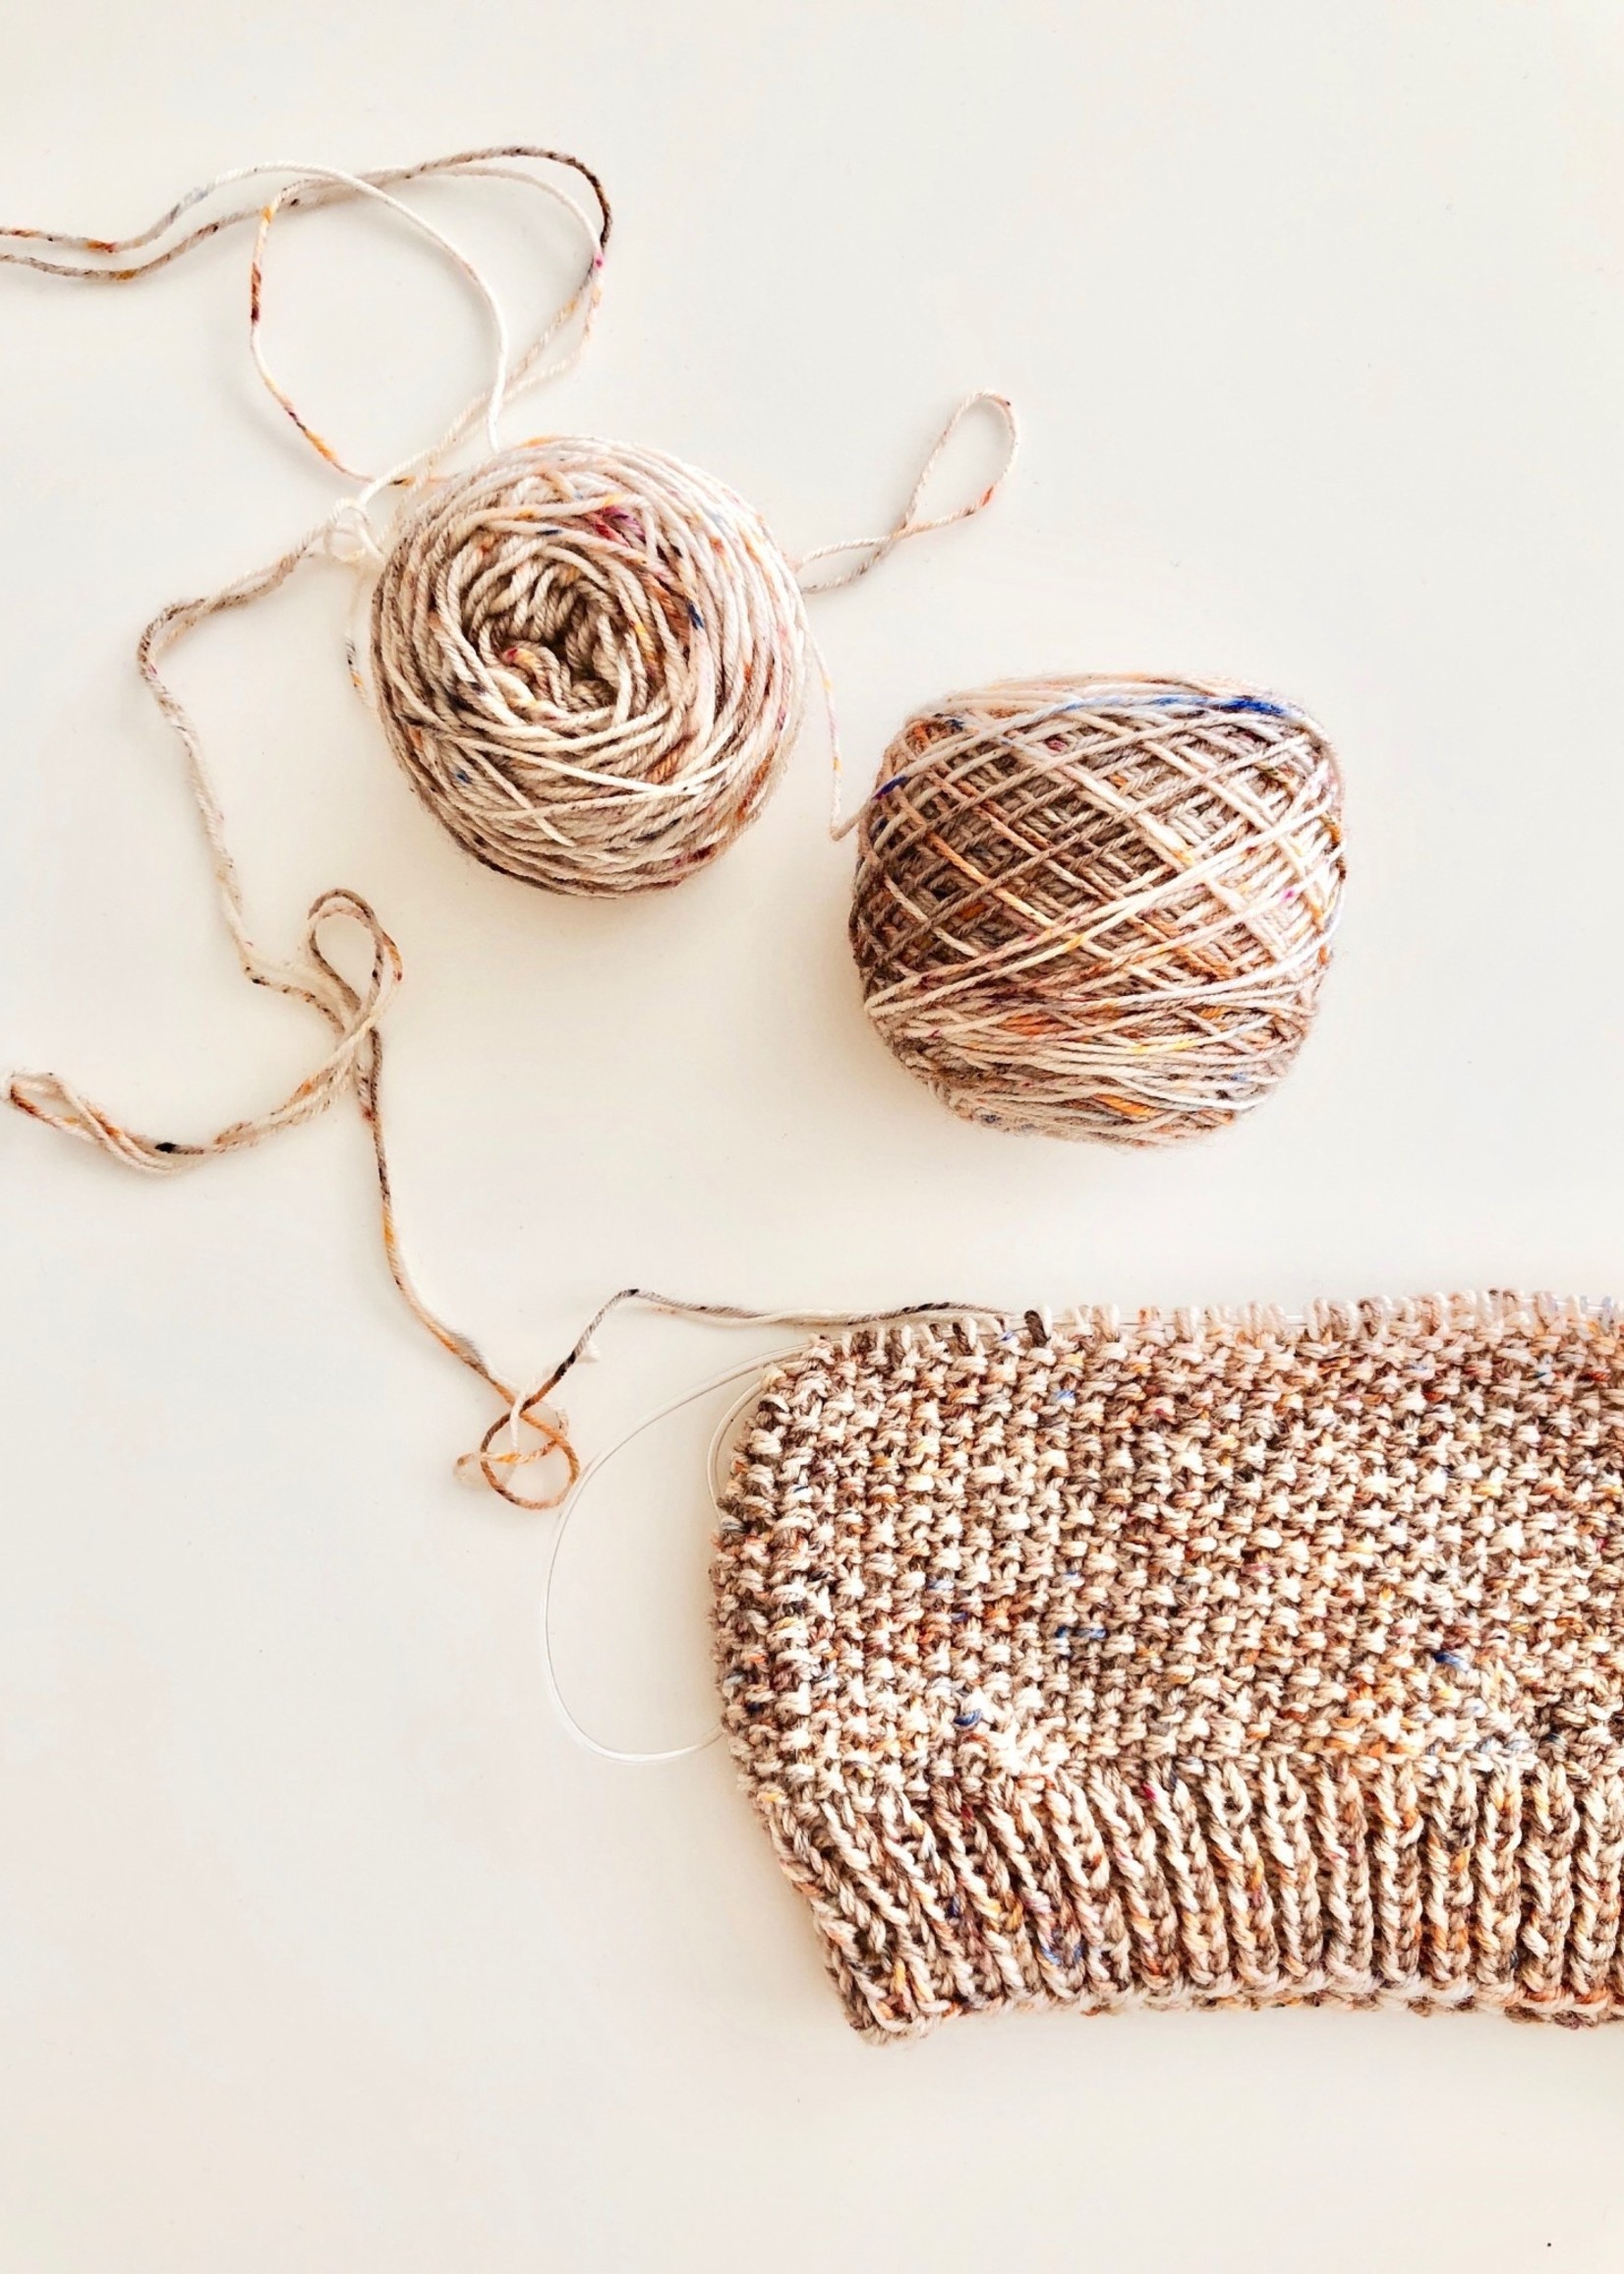 In Person - Learn to Knit Part 2